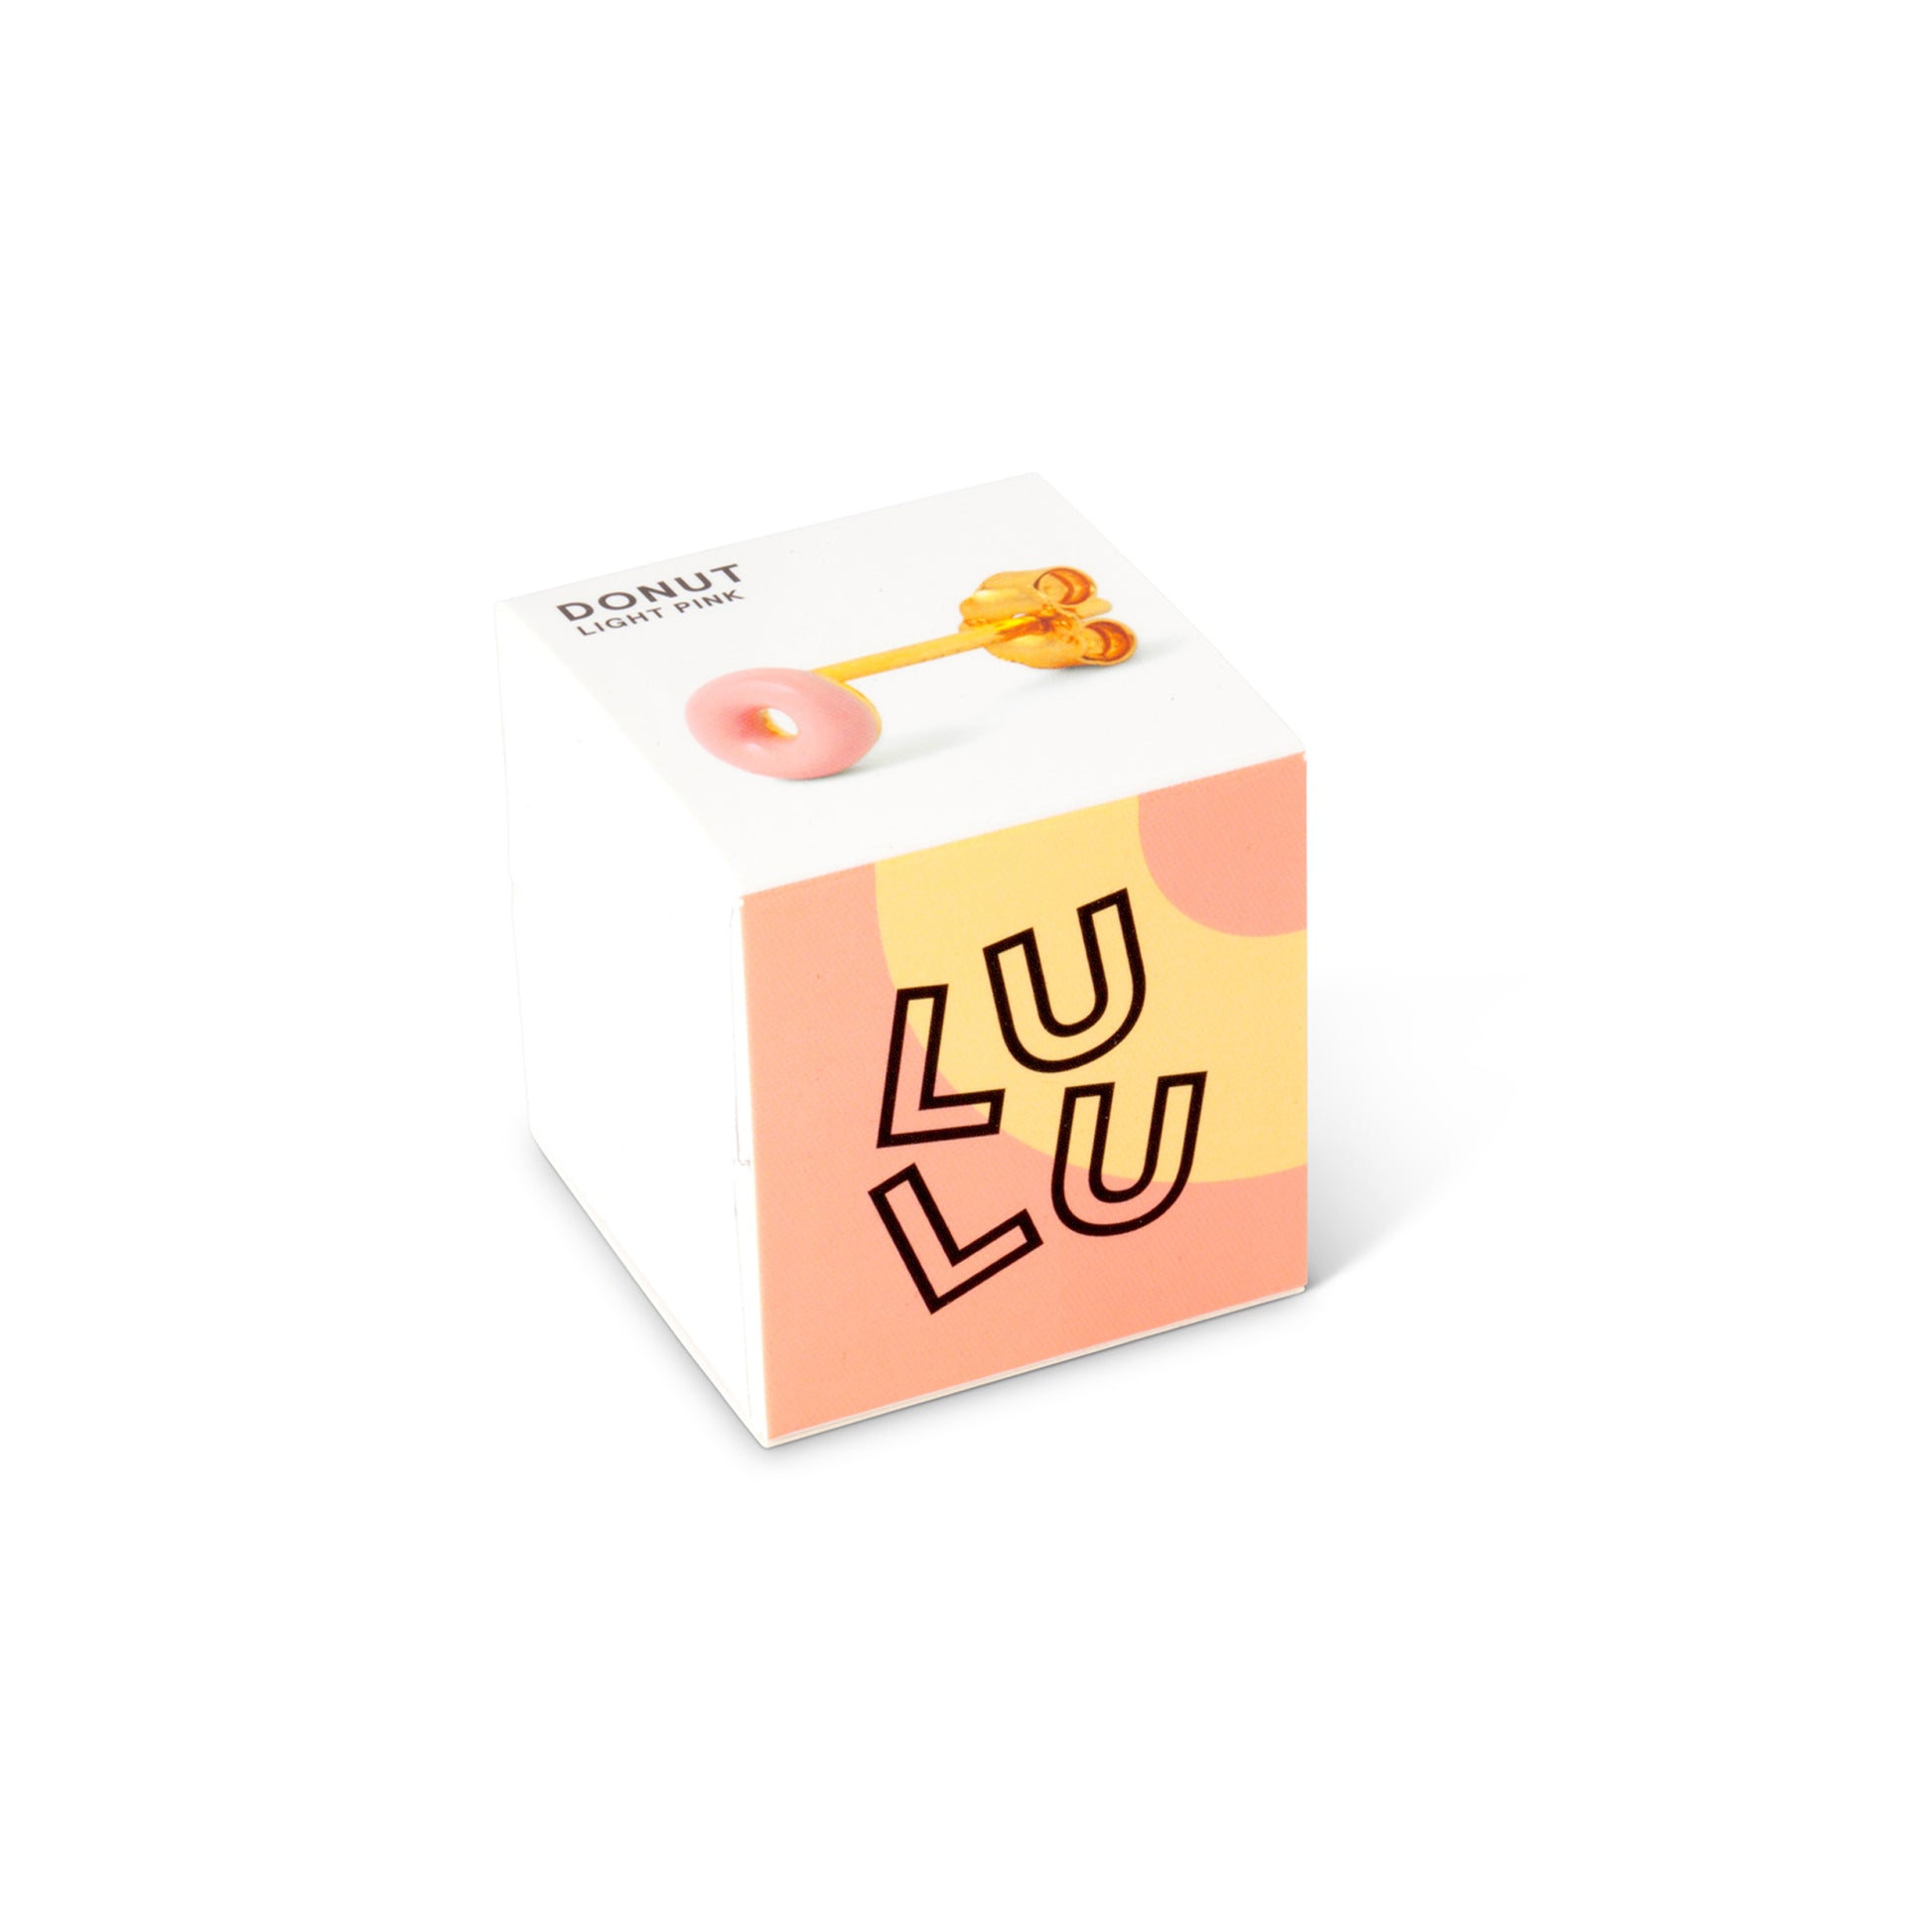 A gold plated box with the word Donut Single Stud - Light Pink by Lulu Copenhagen on it.